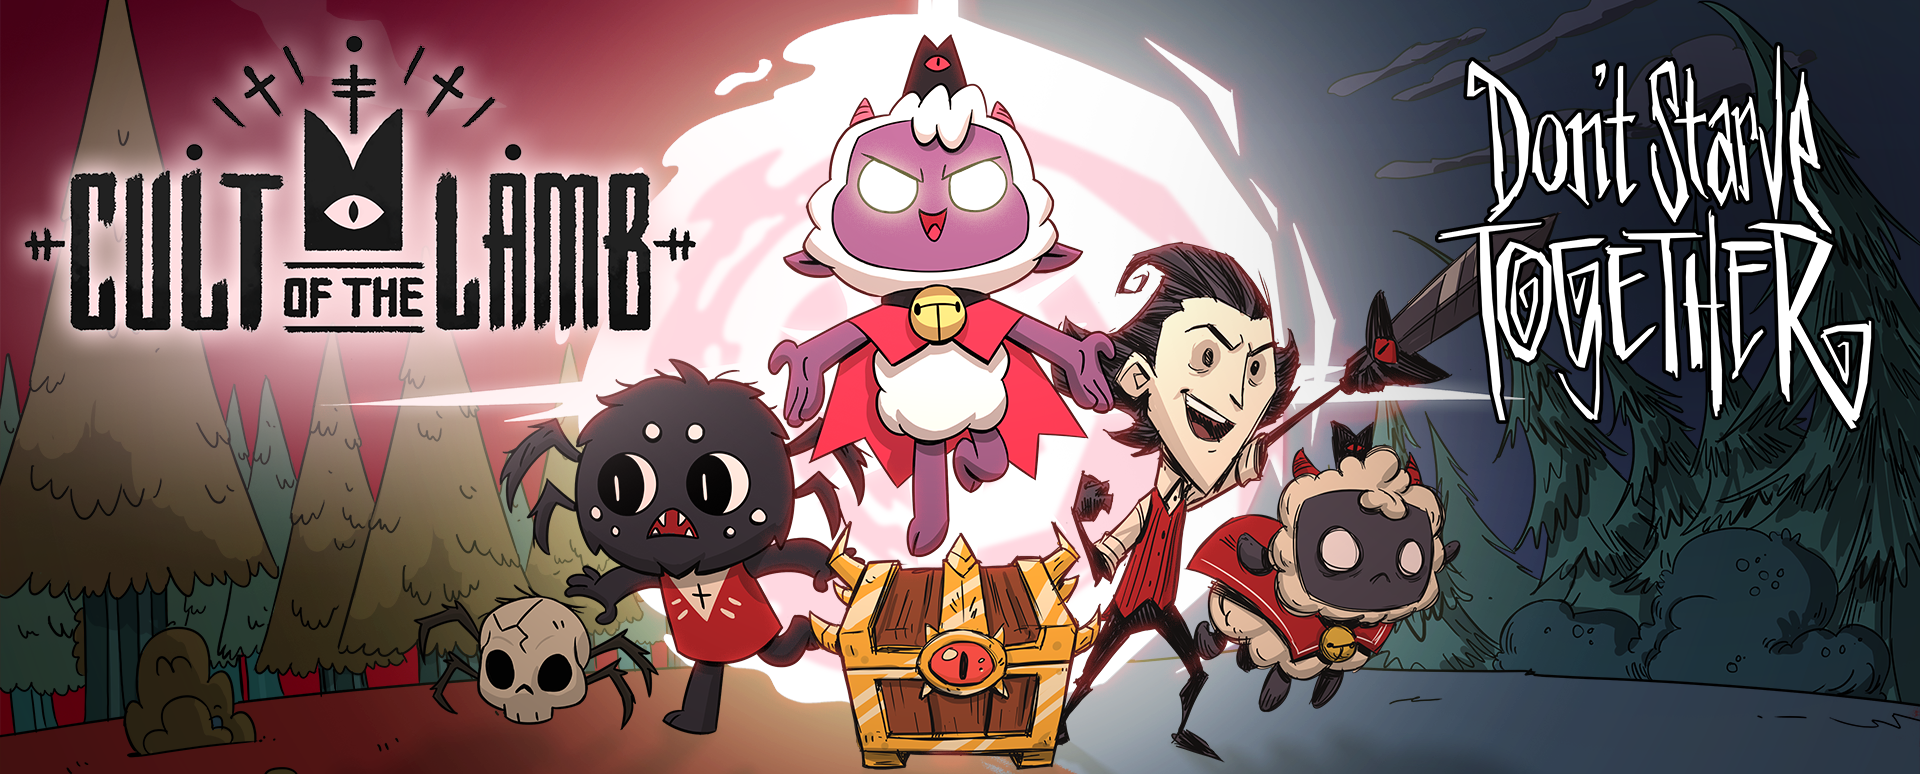 Cult of the Lamb x Don't Starve Crossover key art